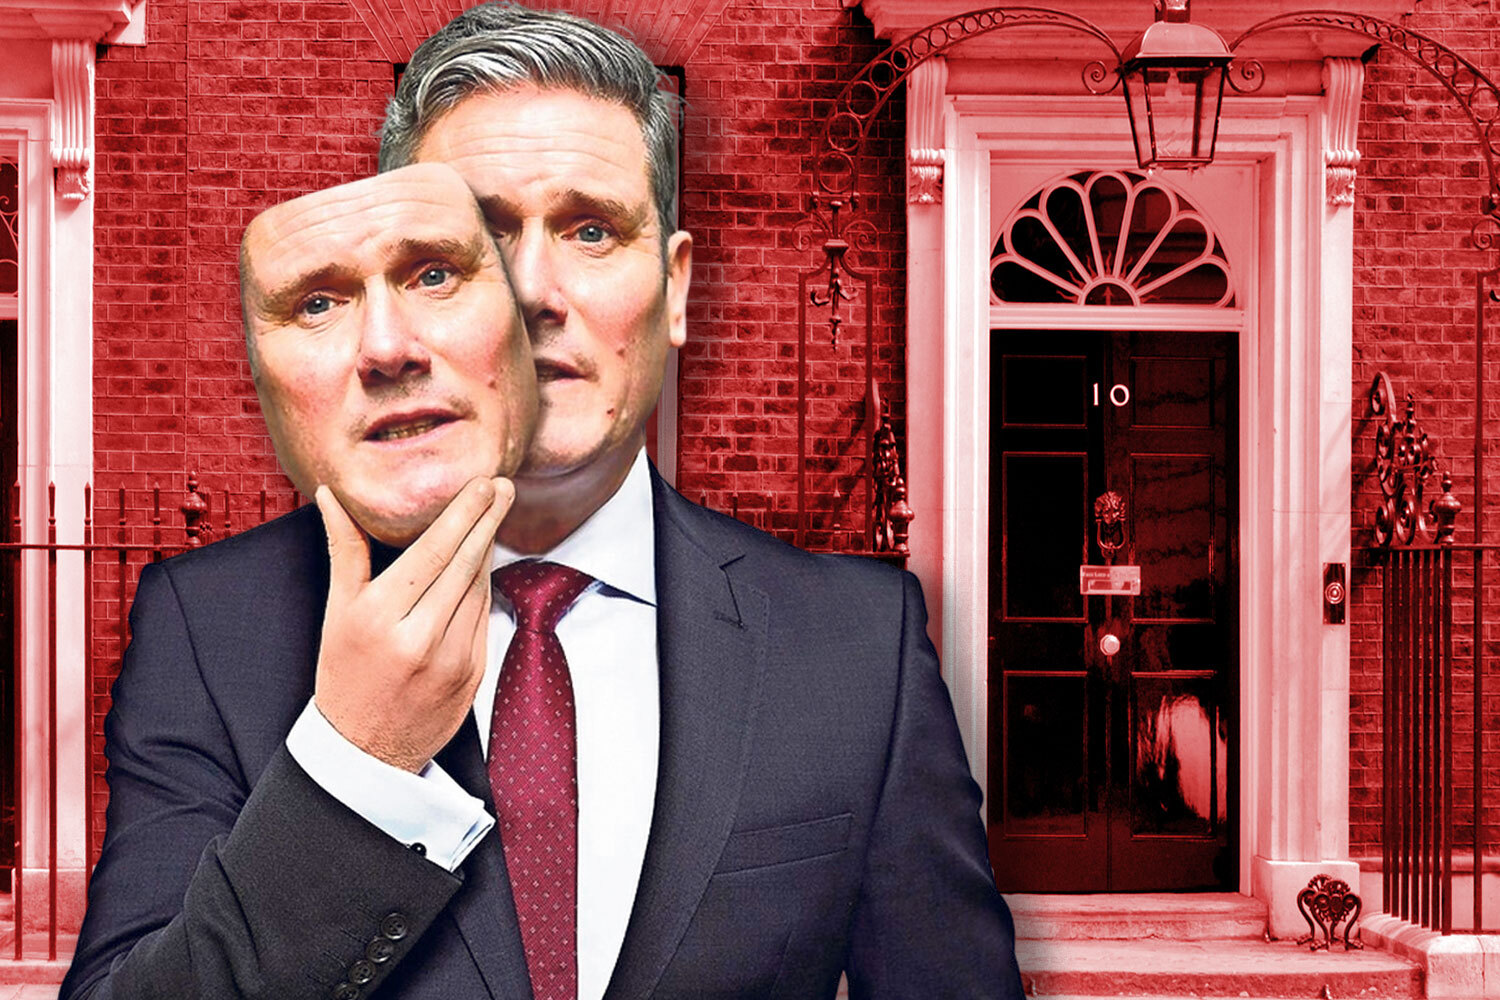 Mr Dull or the self-described ‘socialist’ – does anyone really know which Keir Starmer we are going to get?